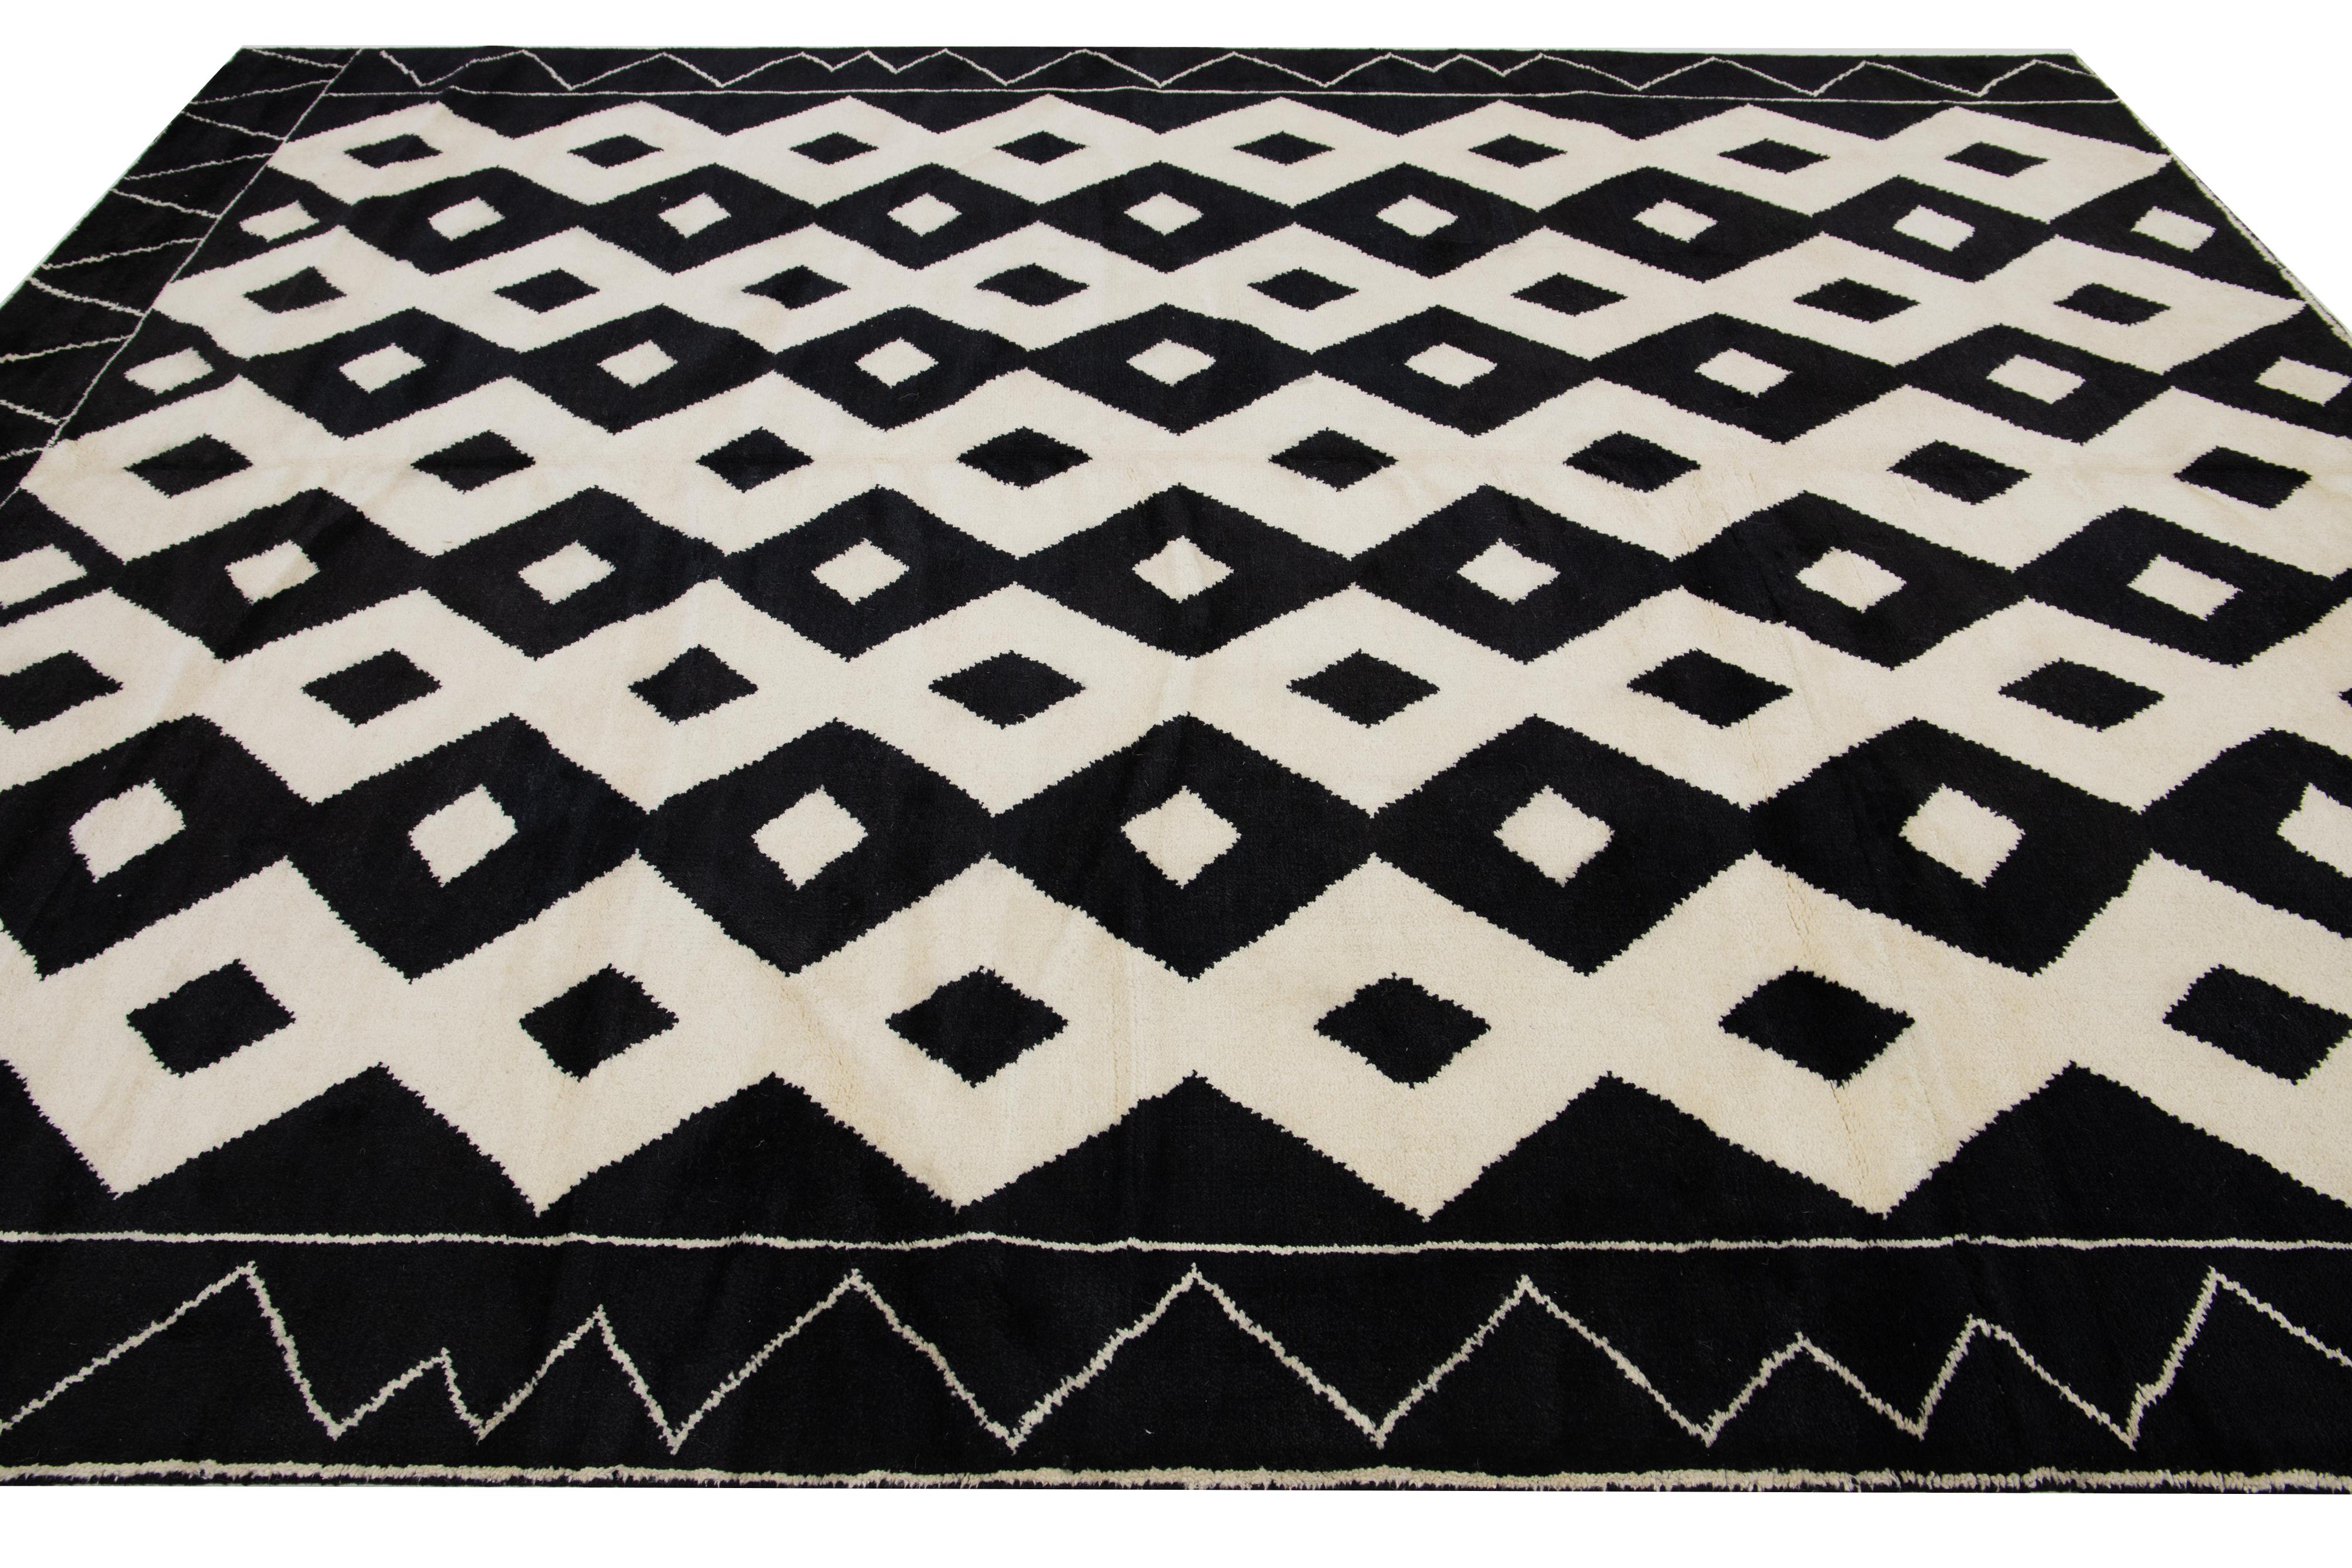 Organic Modern Handmade Tribal Moroccan Style Modern Wool Rug With Ivory and Black Design For Sale